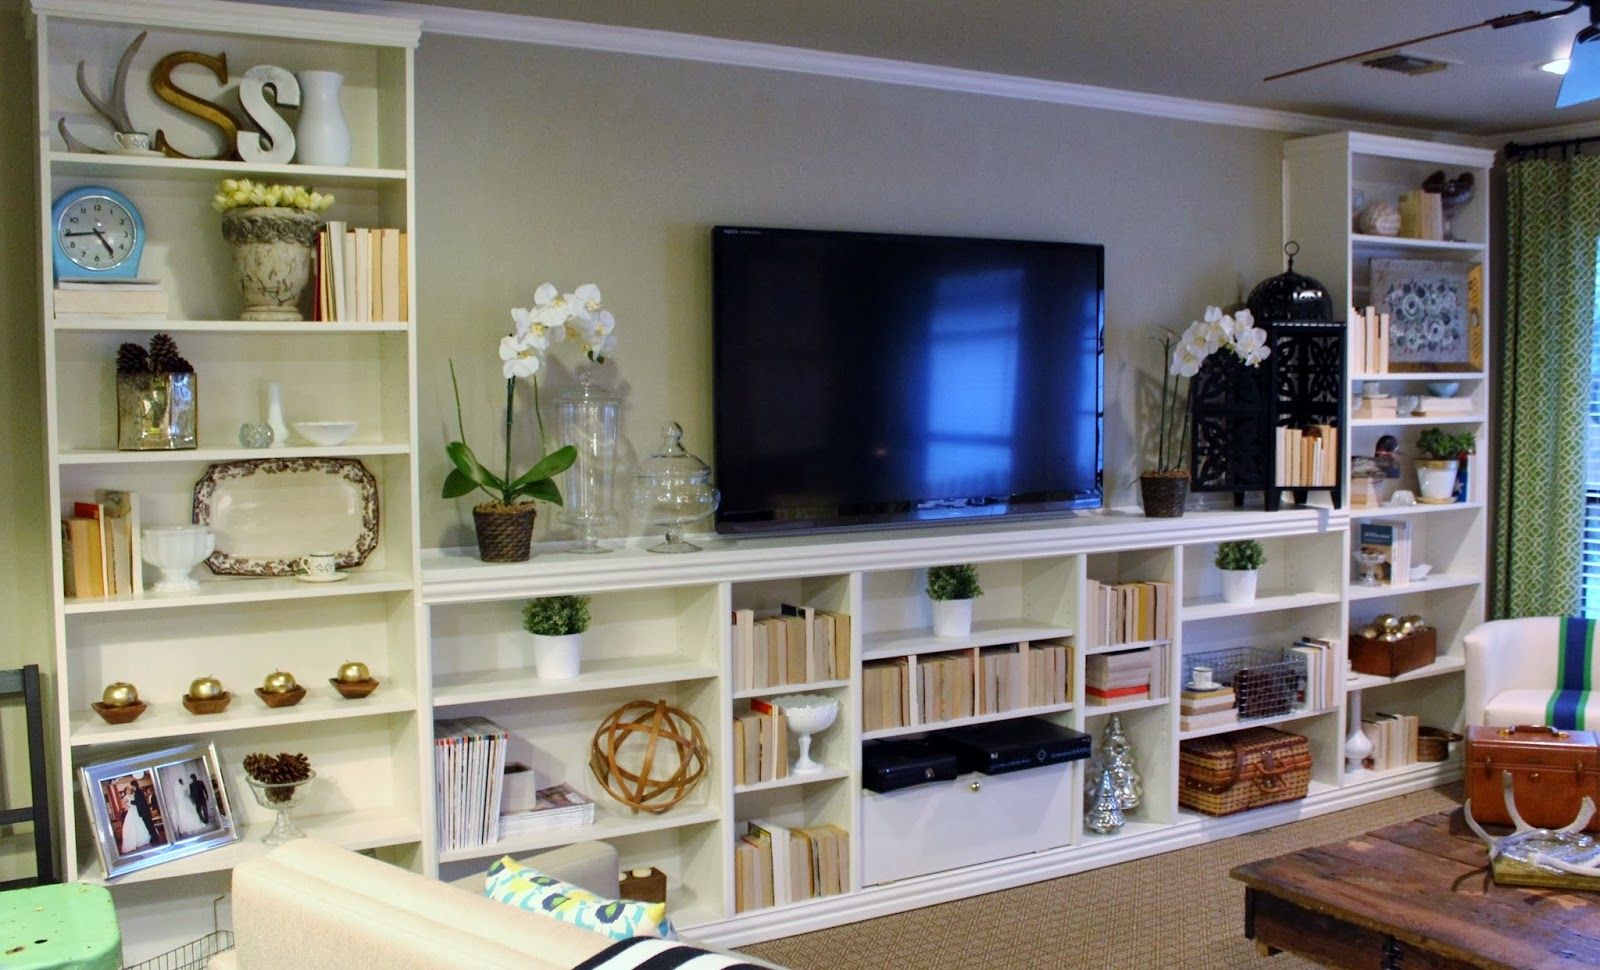 15 Best of Built in Bookcases With Tv